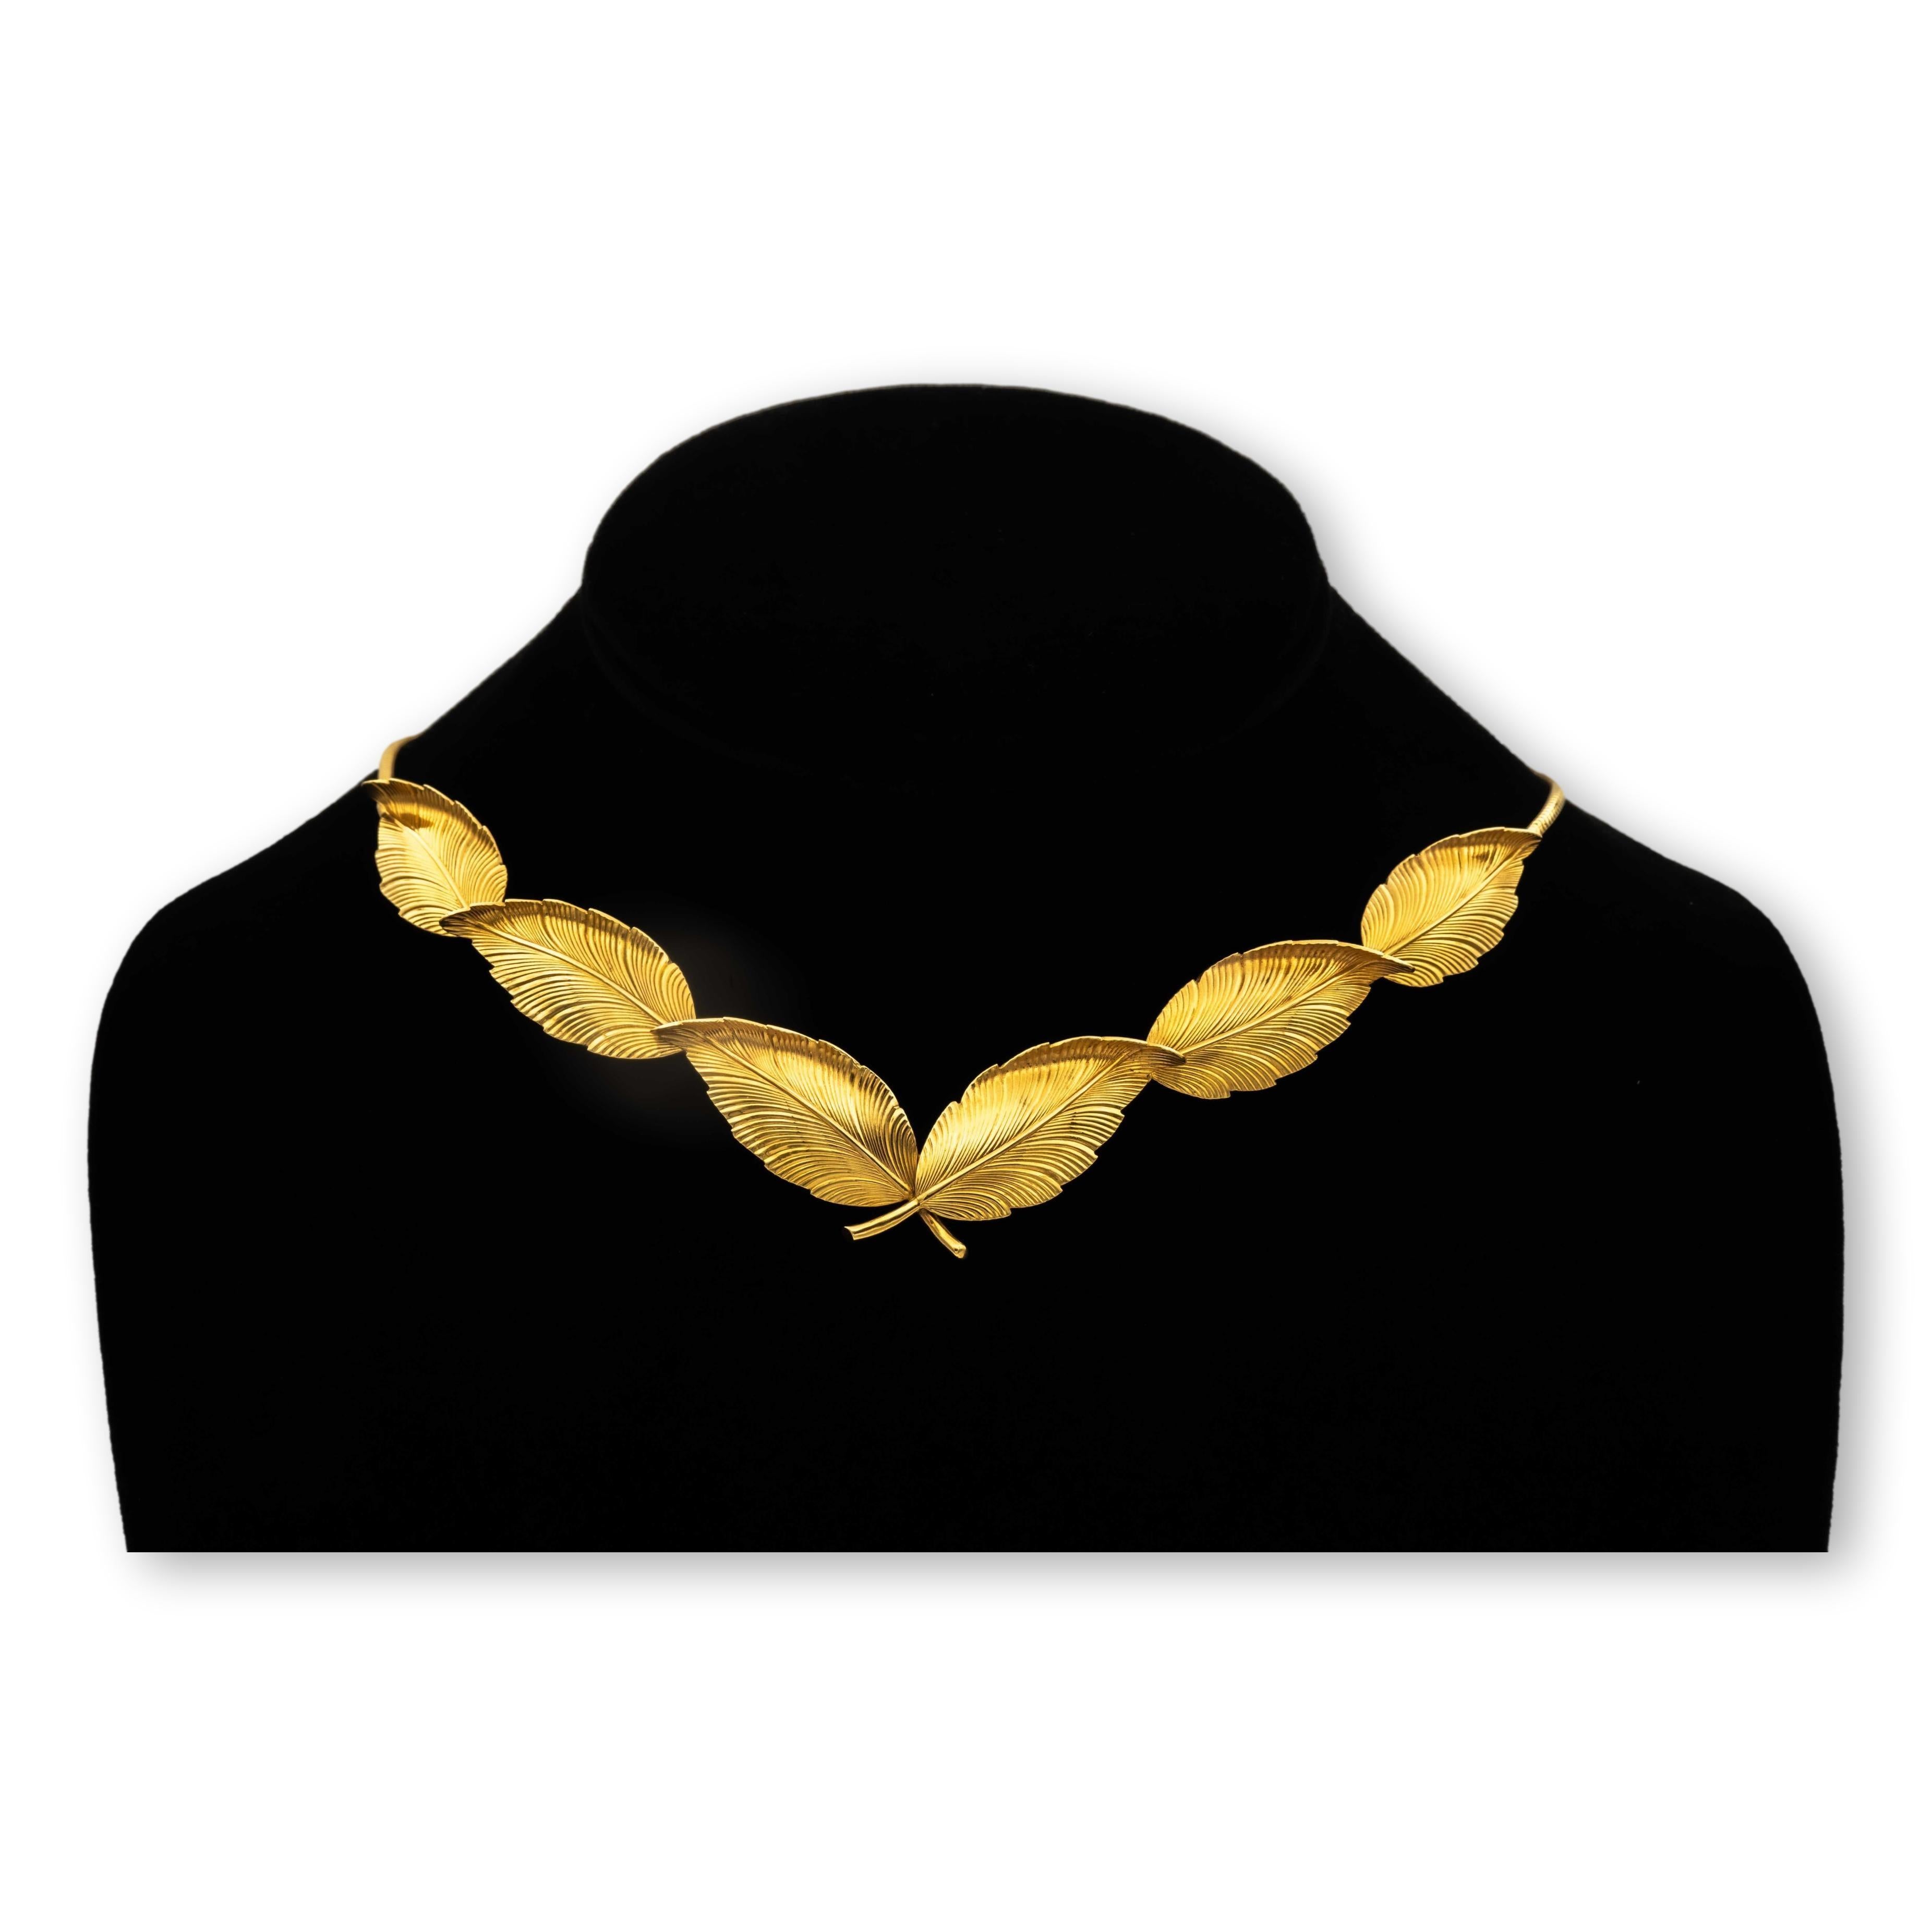 Tiffany & Co. Vintage choker necklace and earrings suite finely crafted in 14 karat yellow gold with rose overtones in a leaf motif design.  The necklace preserves its original patina. Choker necklace is 15.5